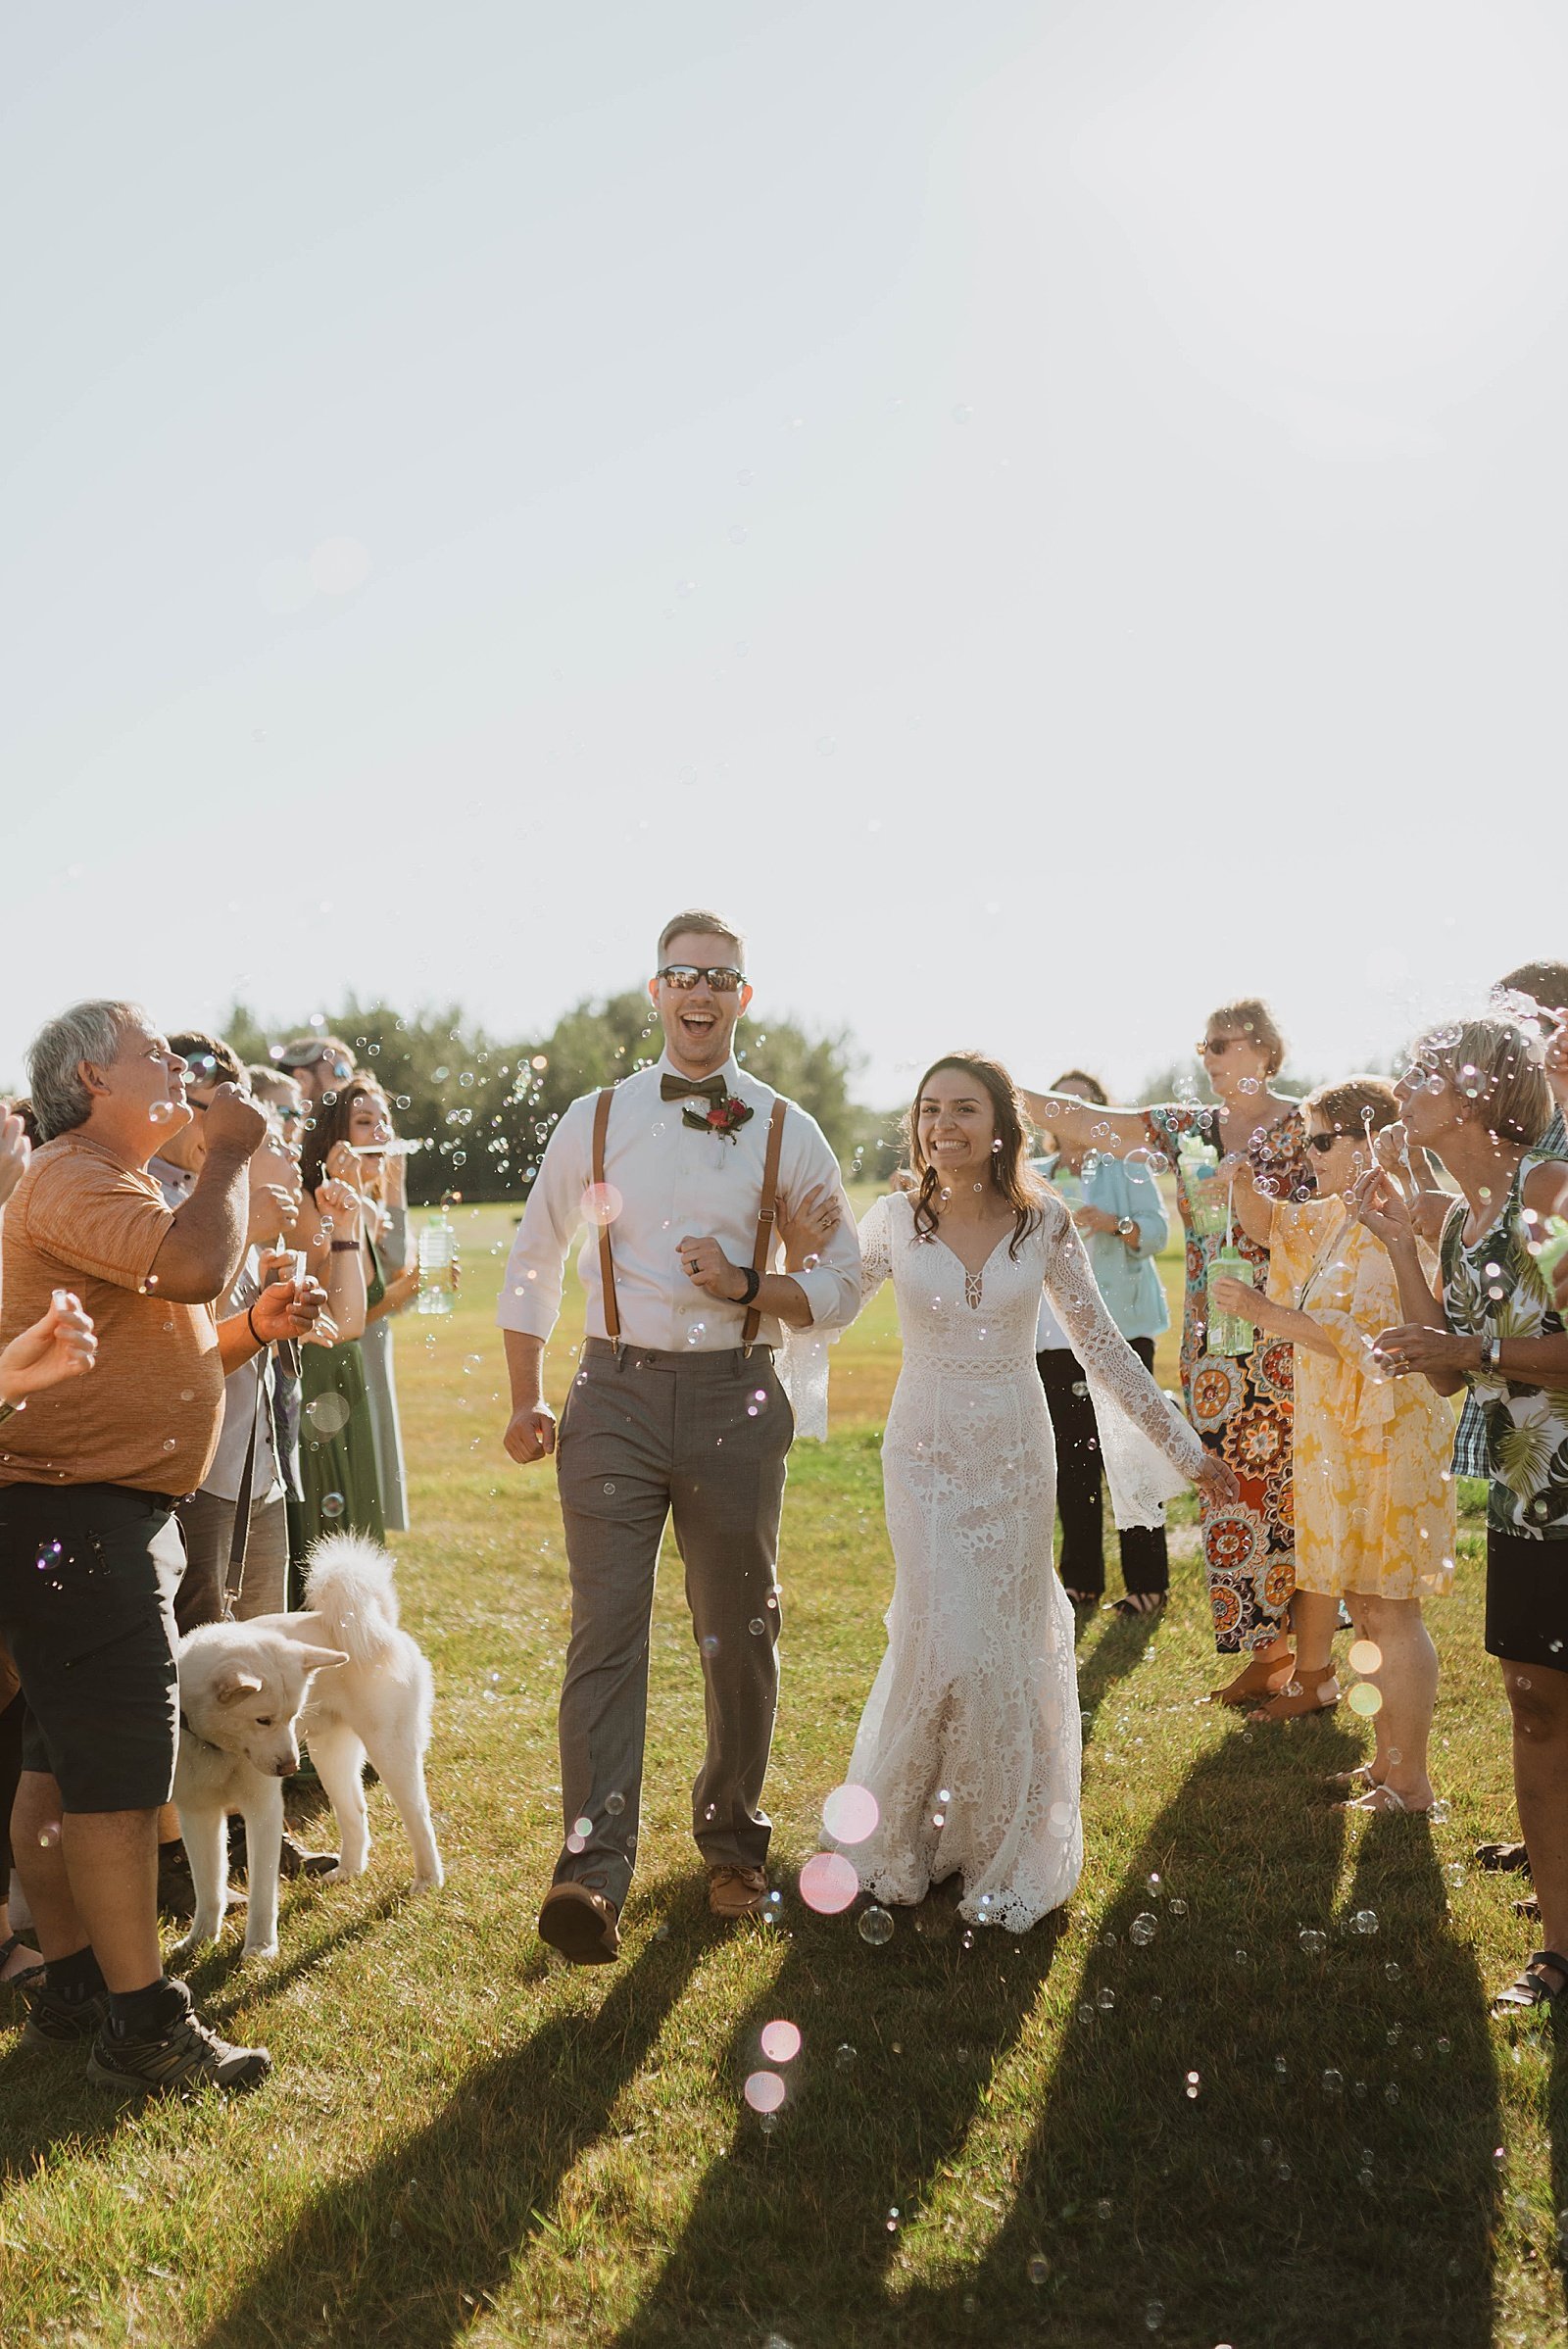  Bride and groom exit as friends blow bubbles to celebrate them  